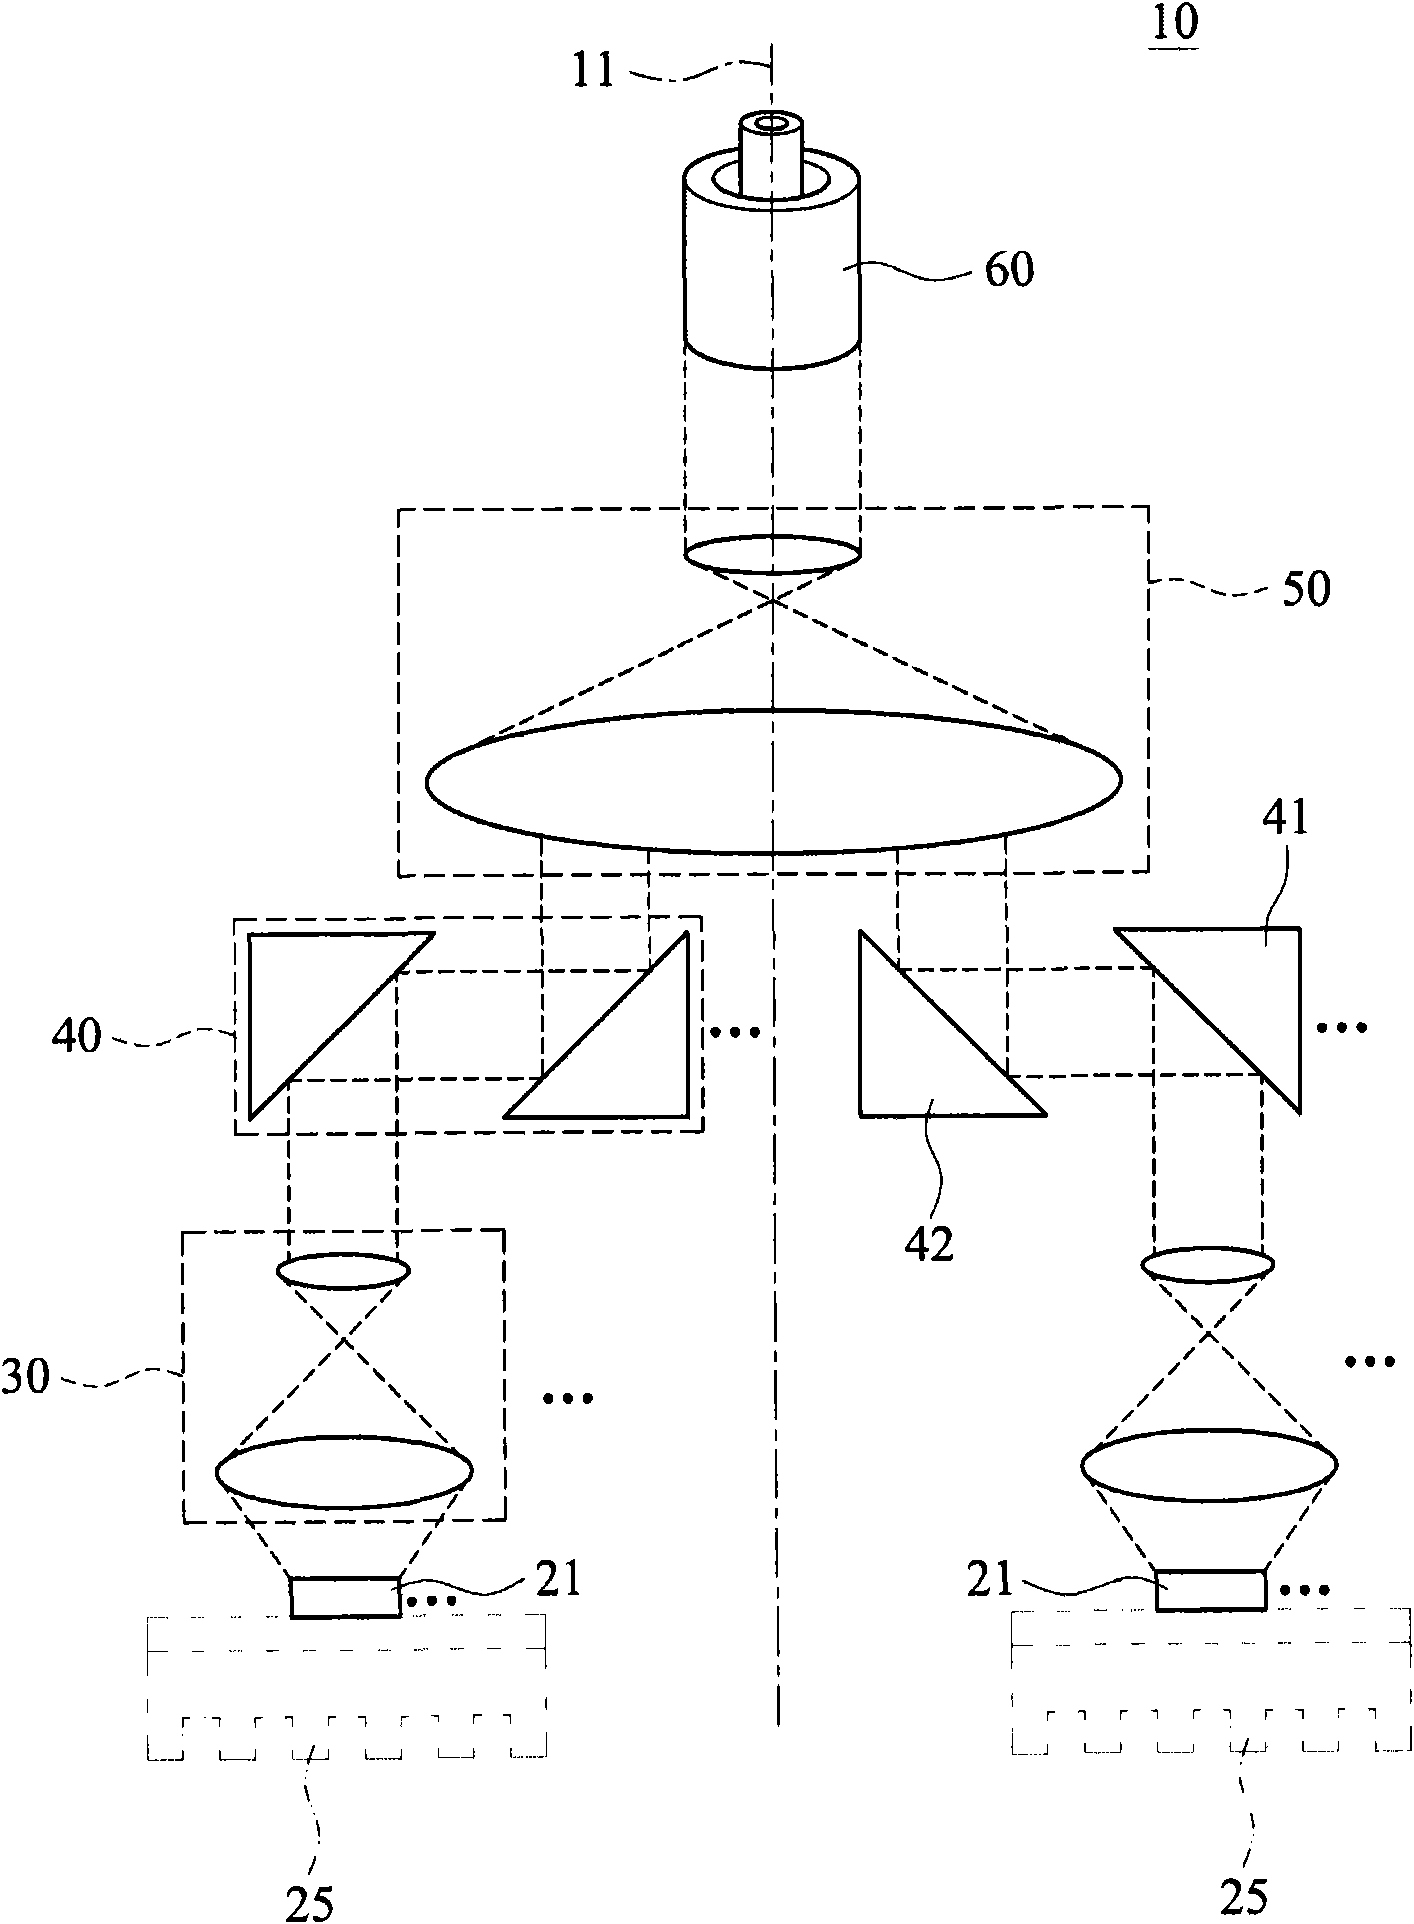 Endoscope light source module structure with light-emitting diodes